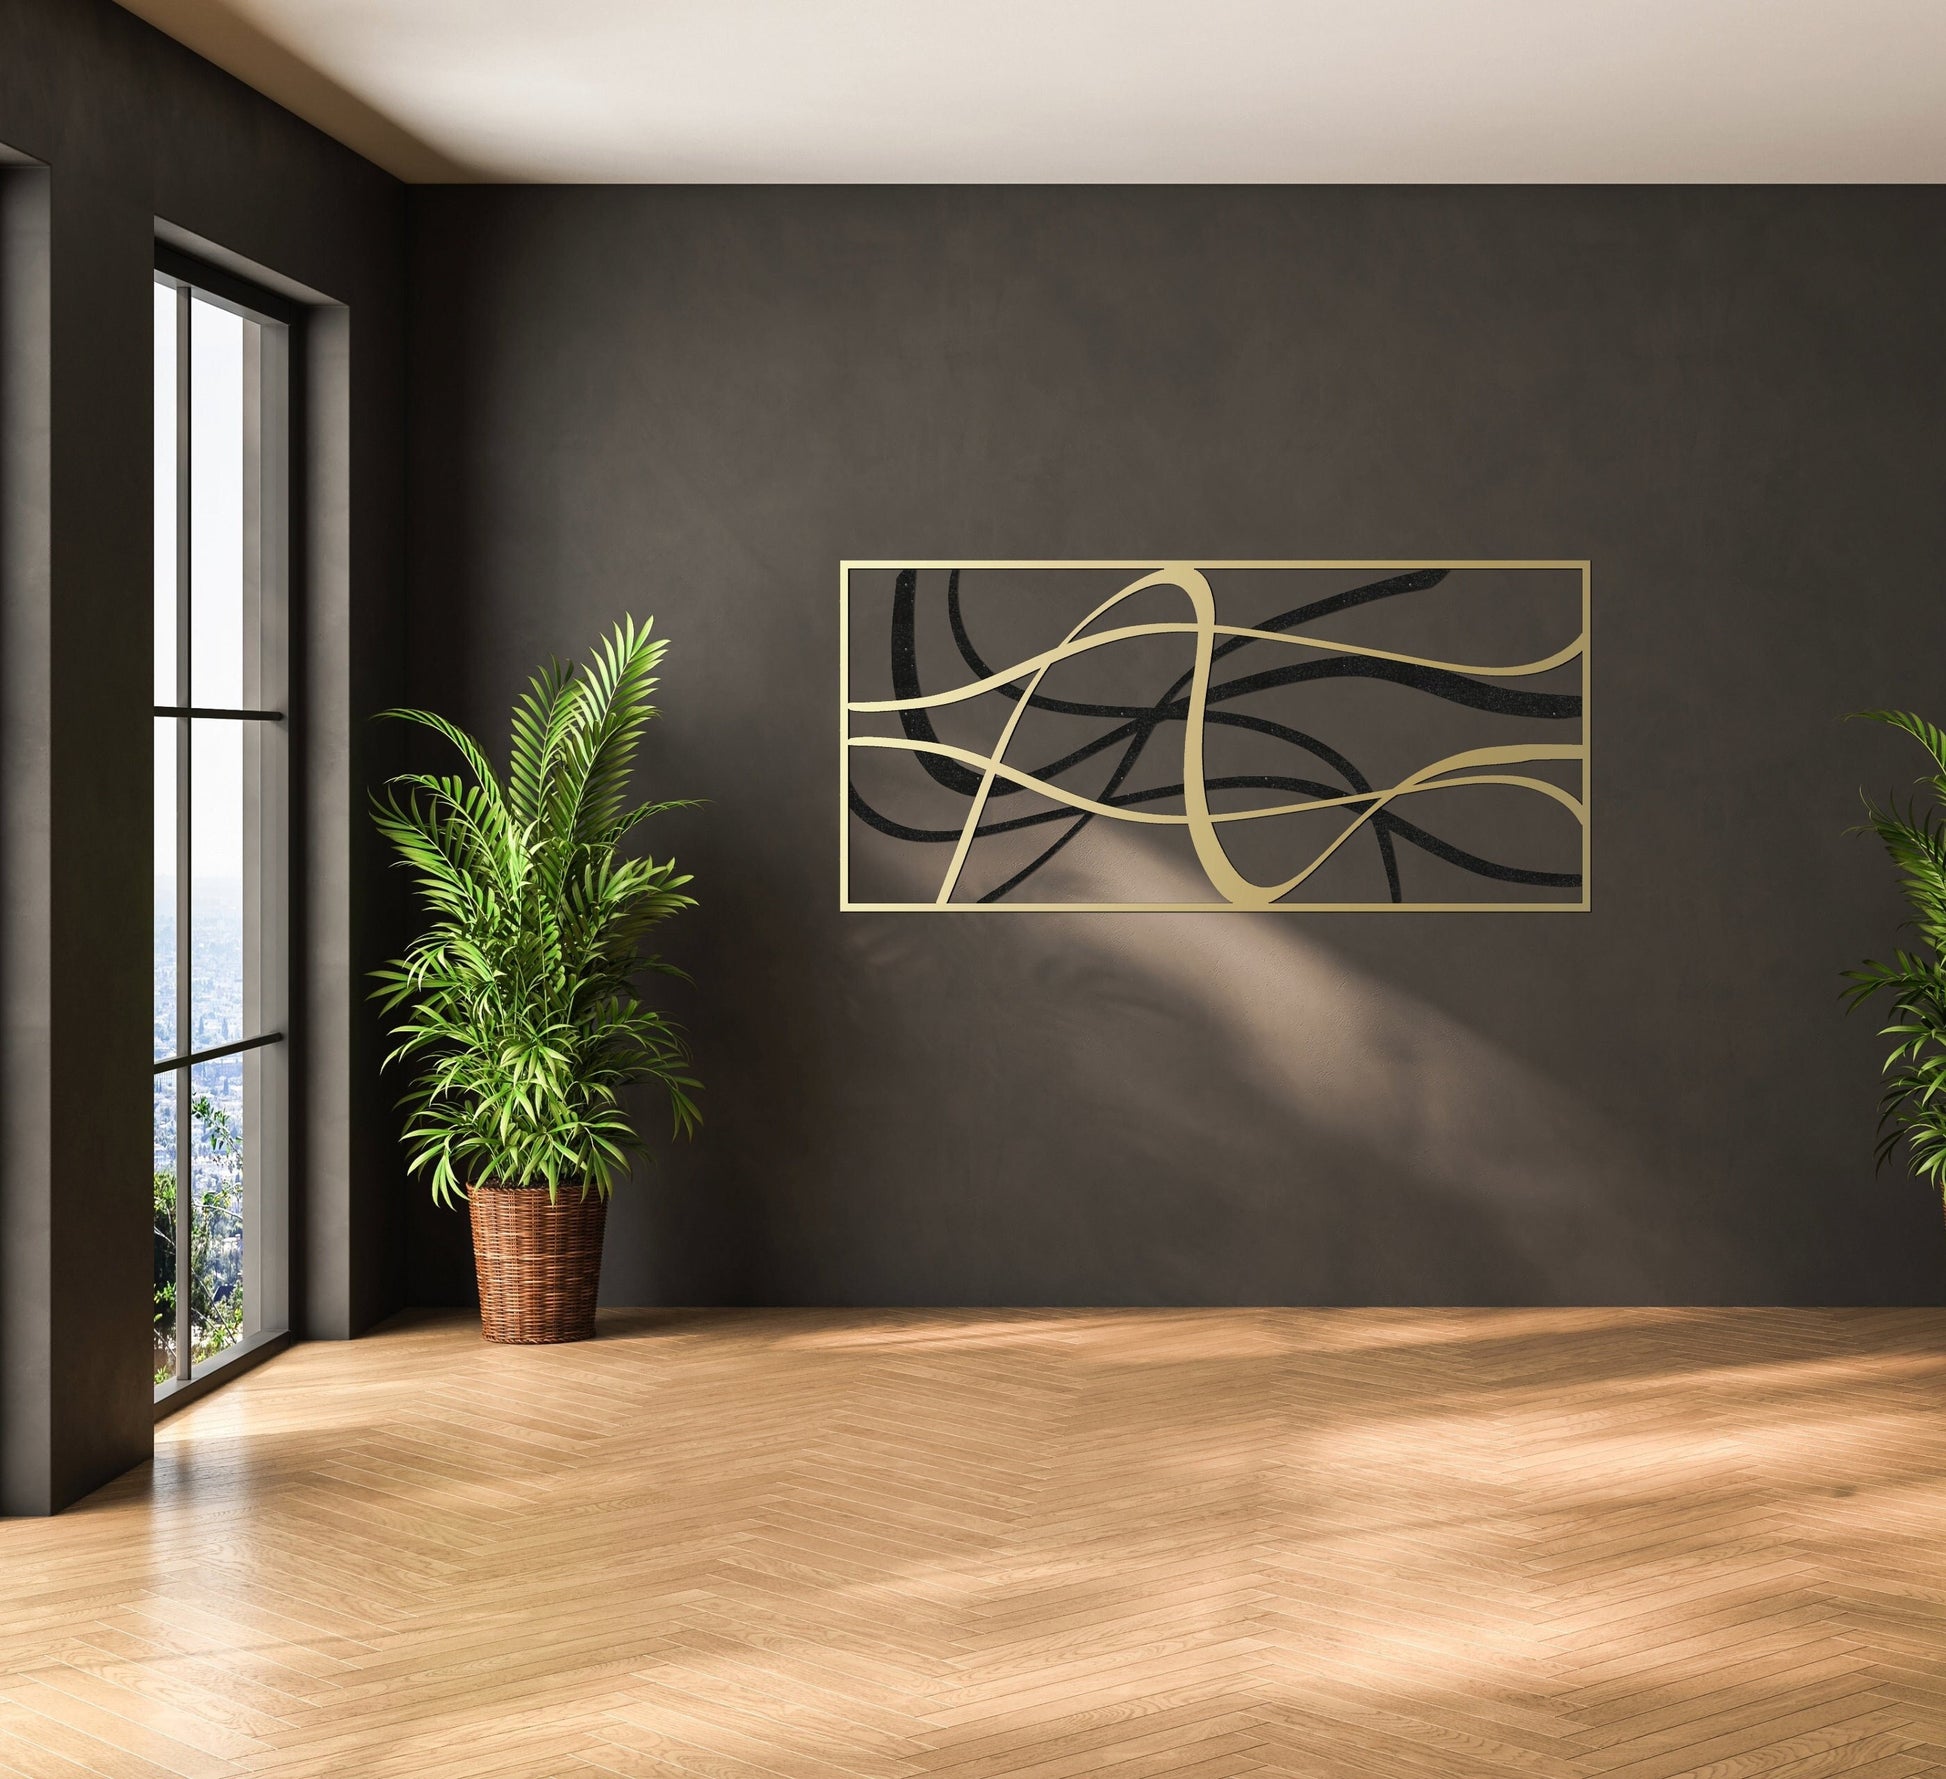 Oversize Abstract Metal Wall Art, Black and Gold Metal Decor, Modern Living Room, Large Home Gift